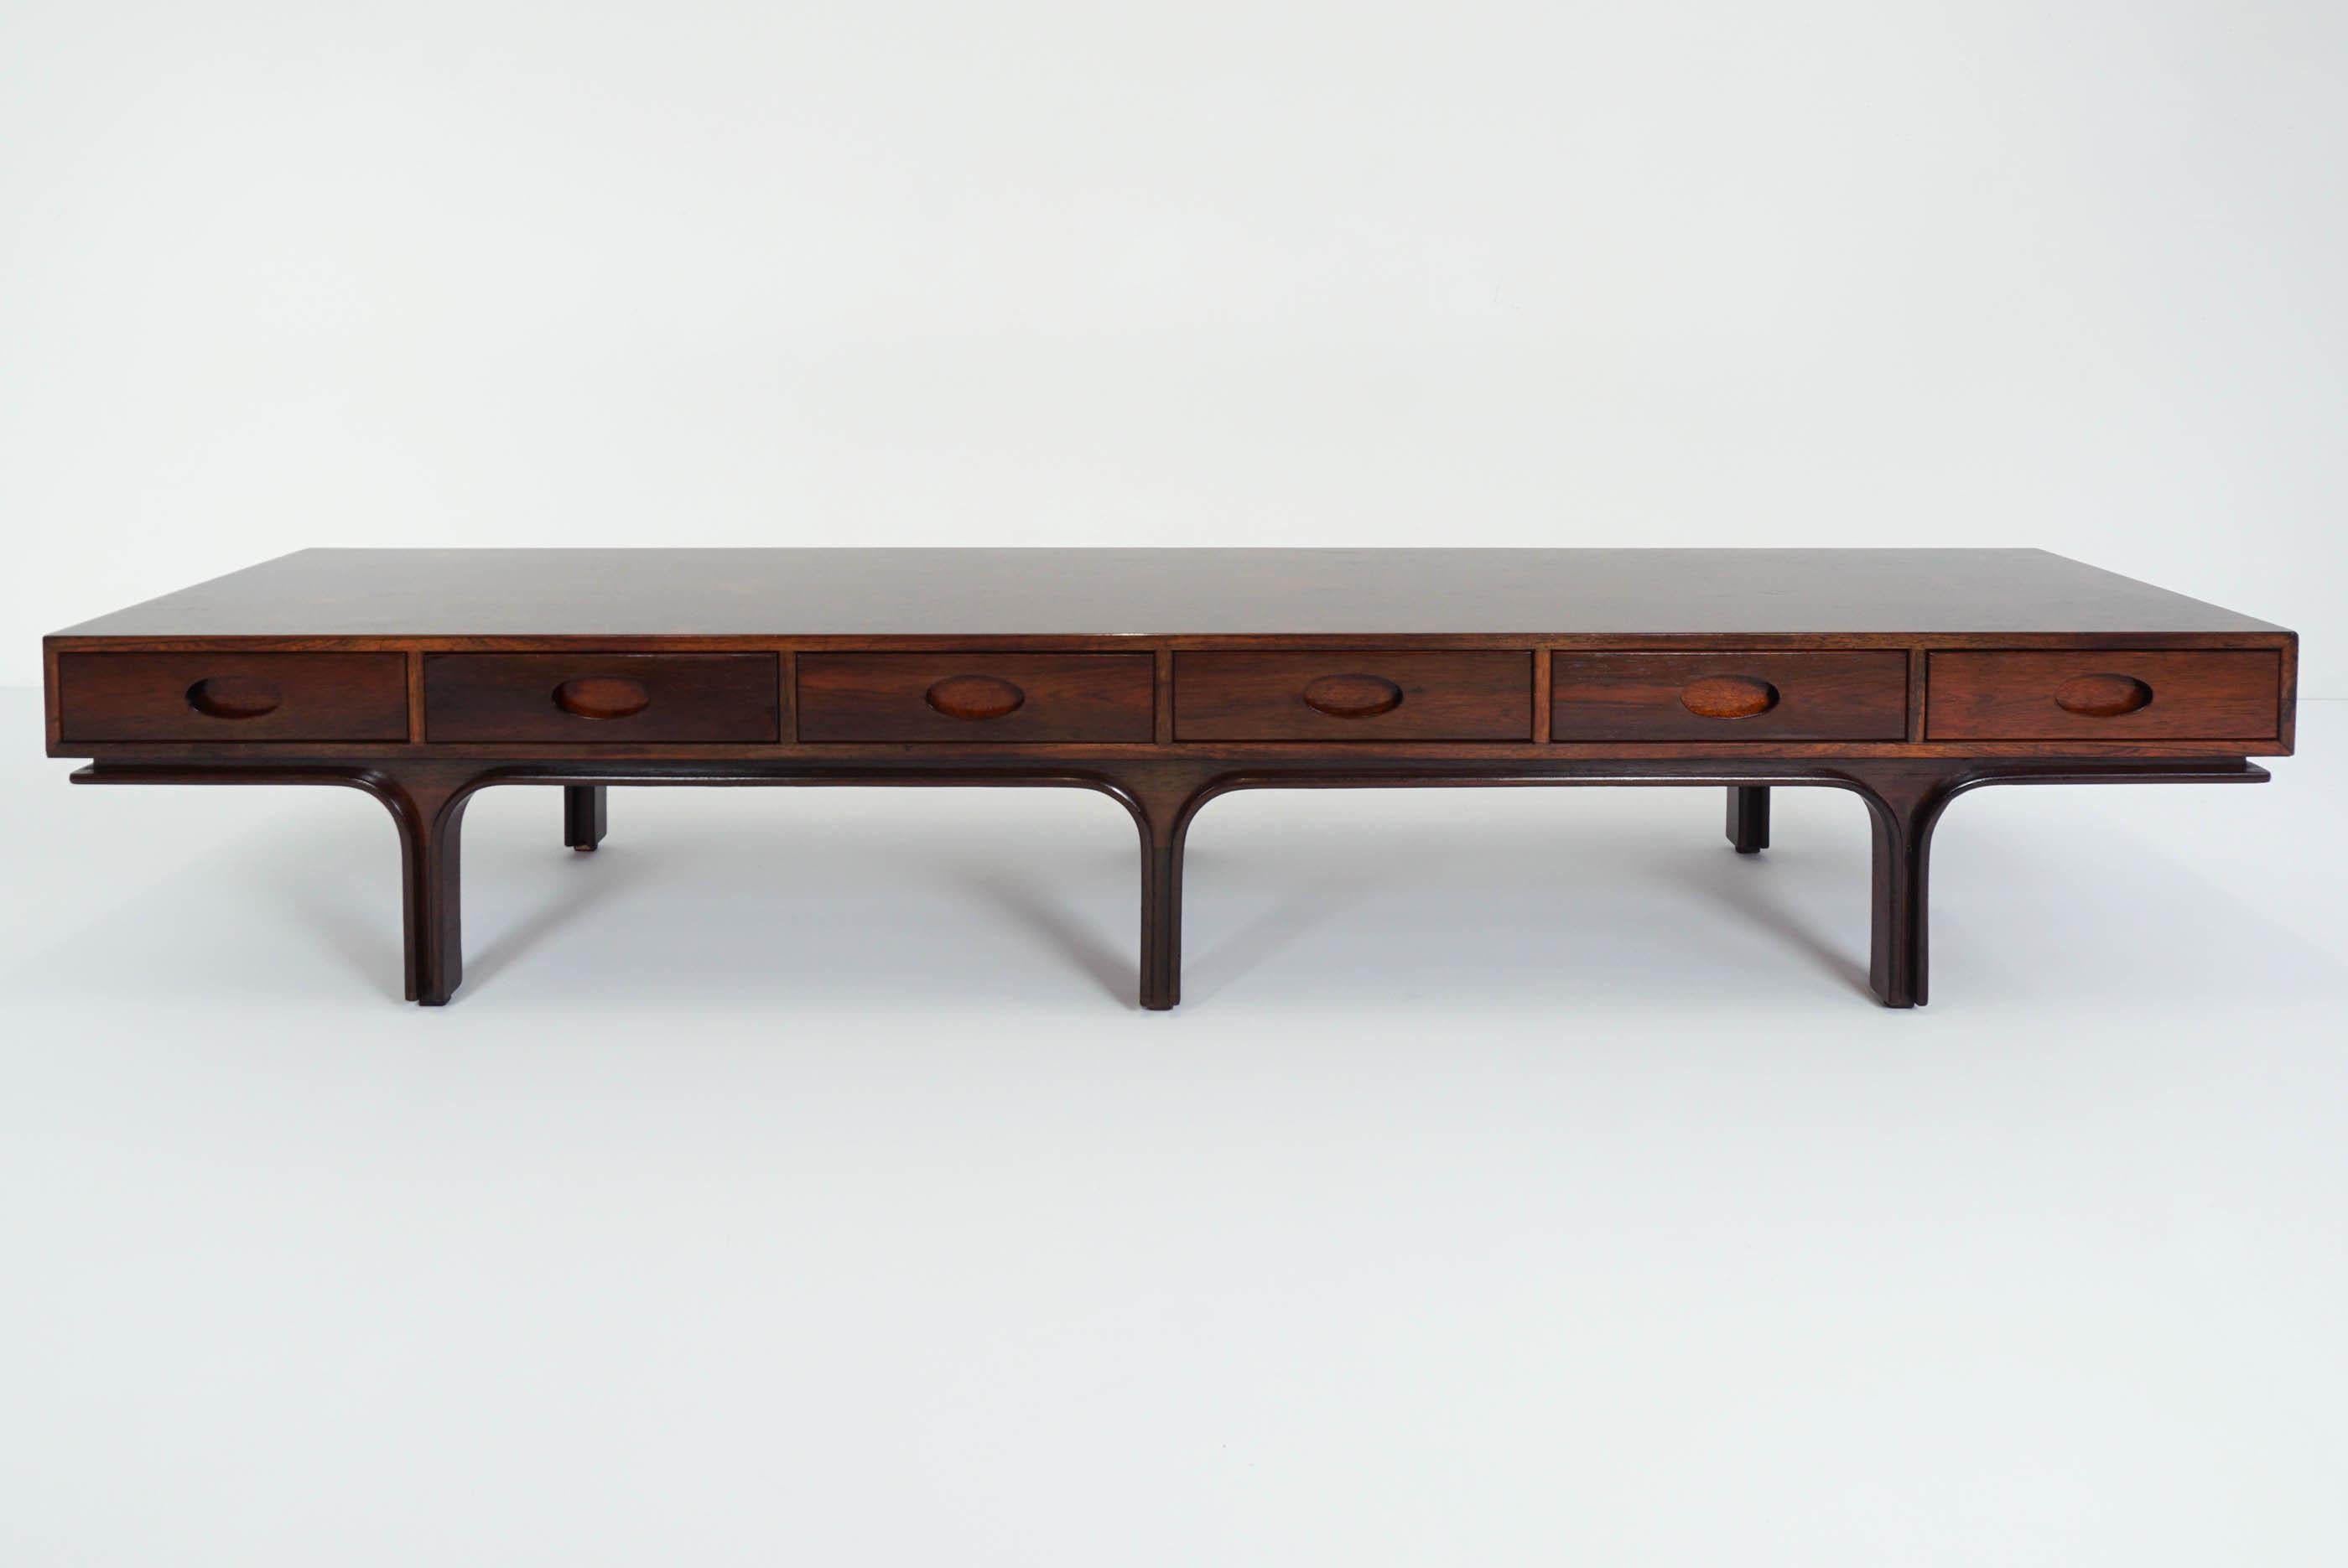 Elegant center long bench or long coffee table with 6 drawers in elegant jacaranda wood,
Italy, 1961.